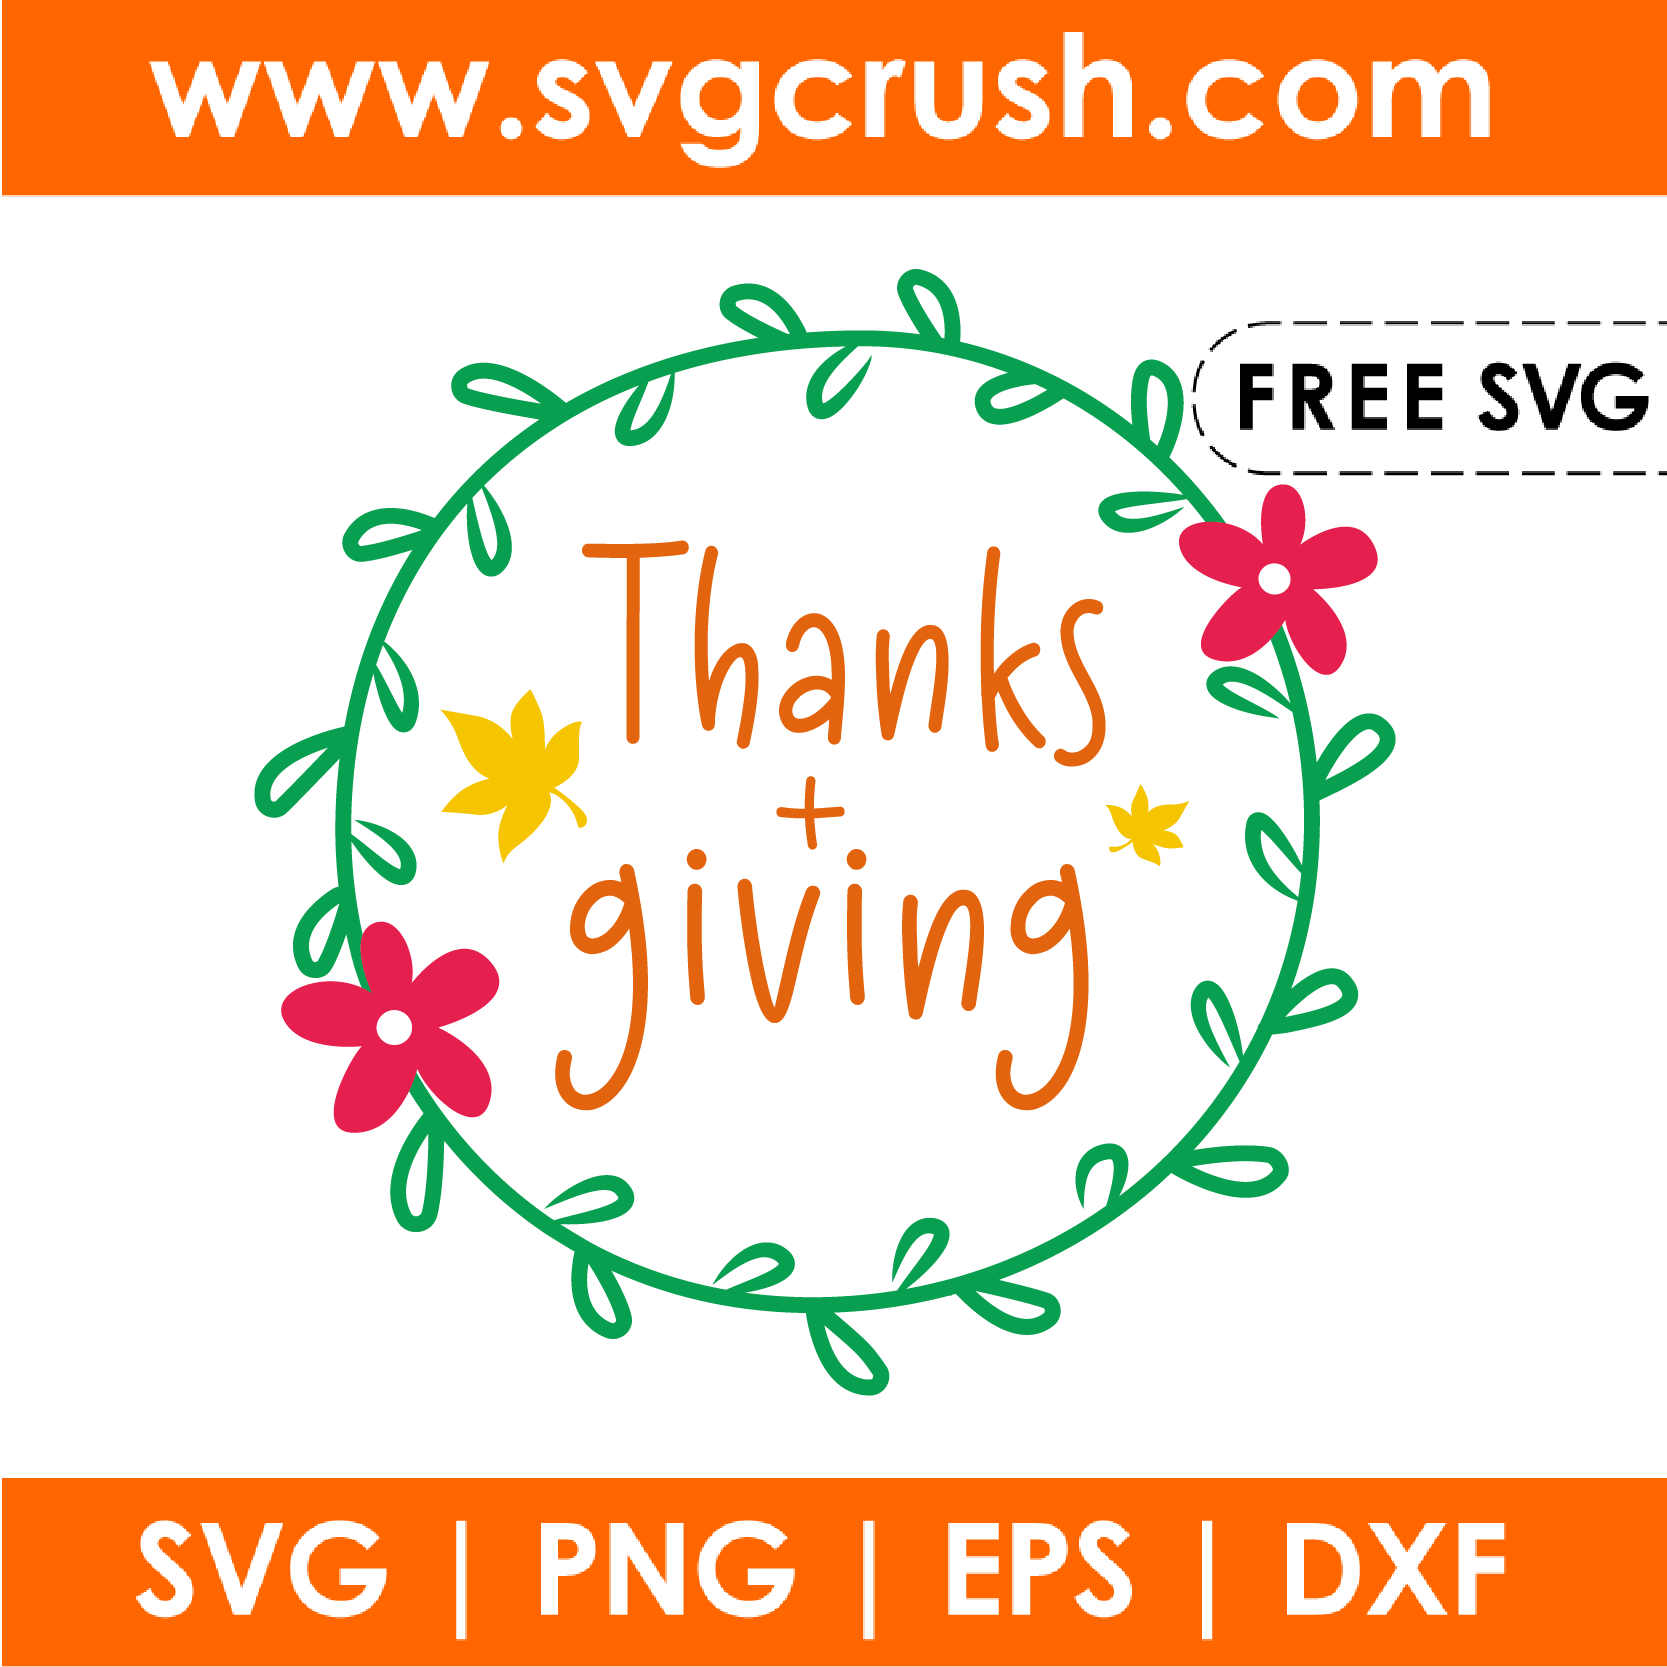 free thanks+giving-002 svg